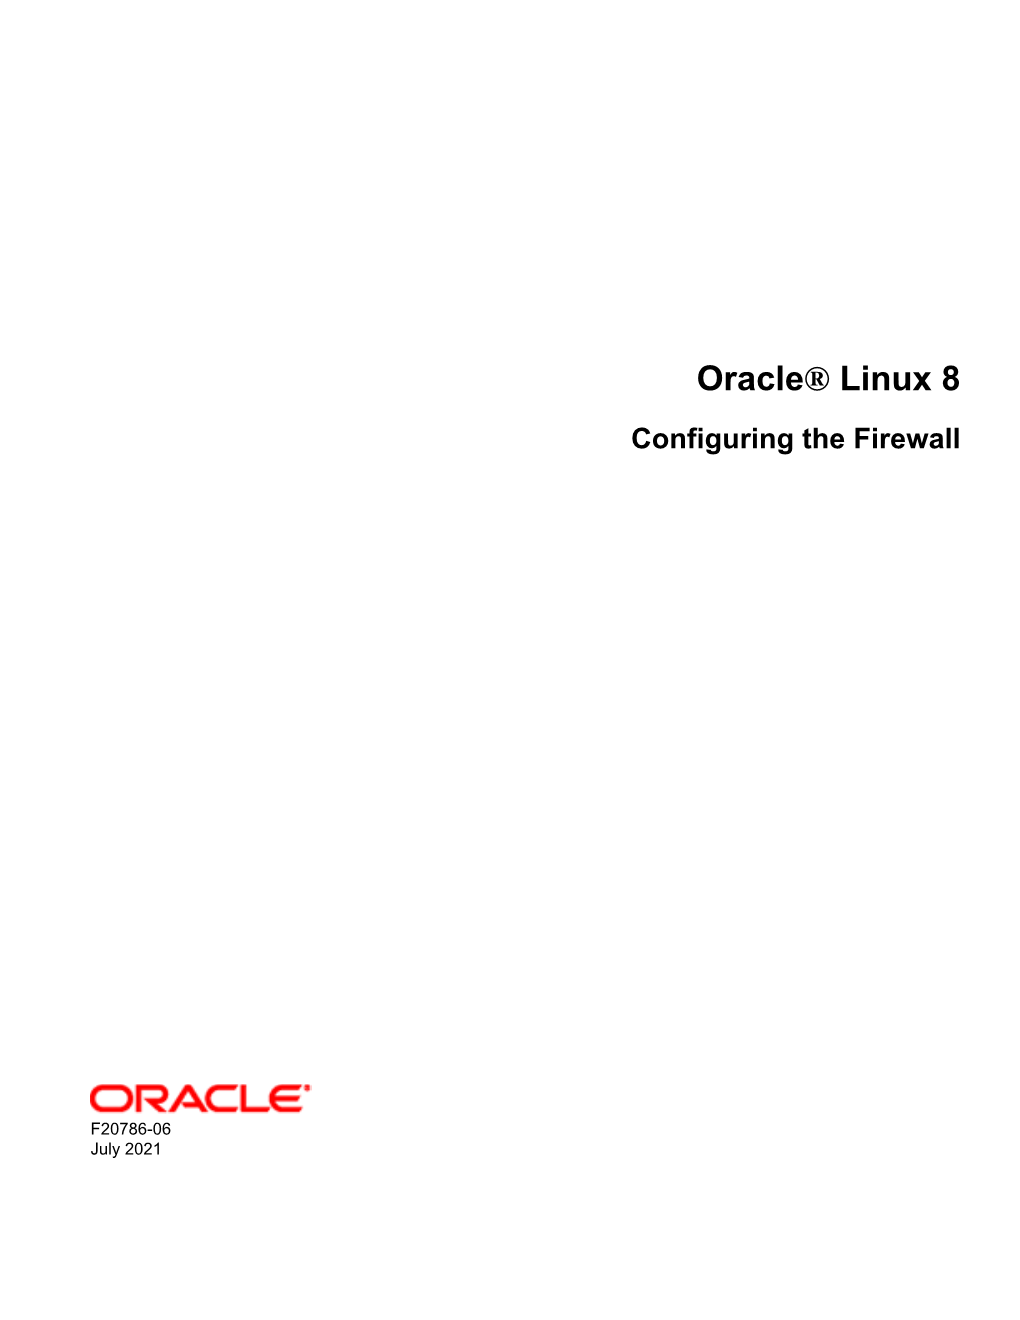 Oracle® Linux 8 Configuring the Firewall